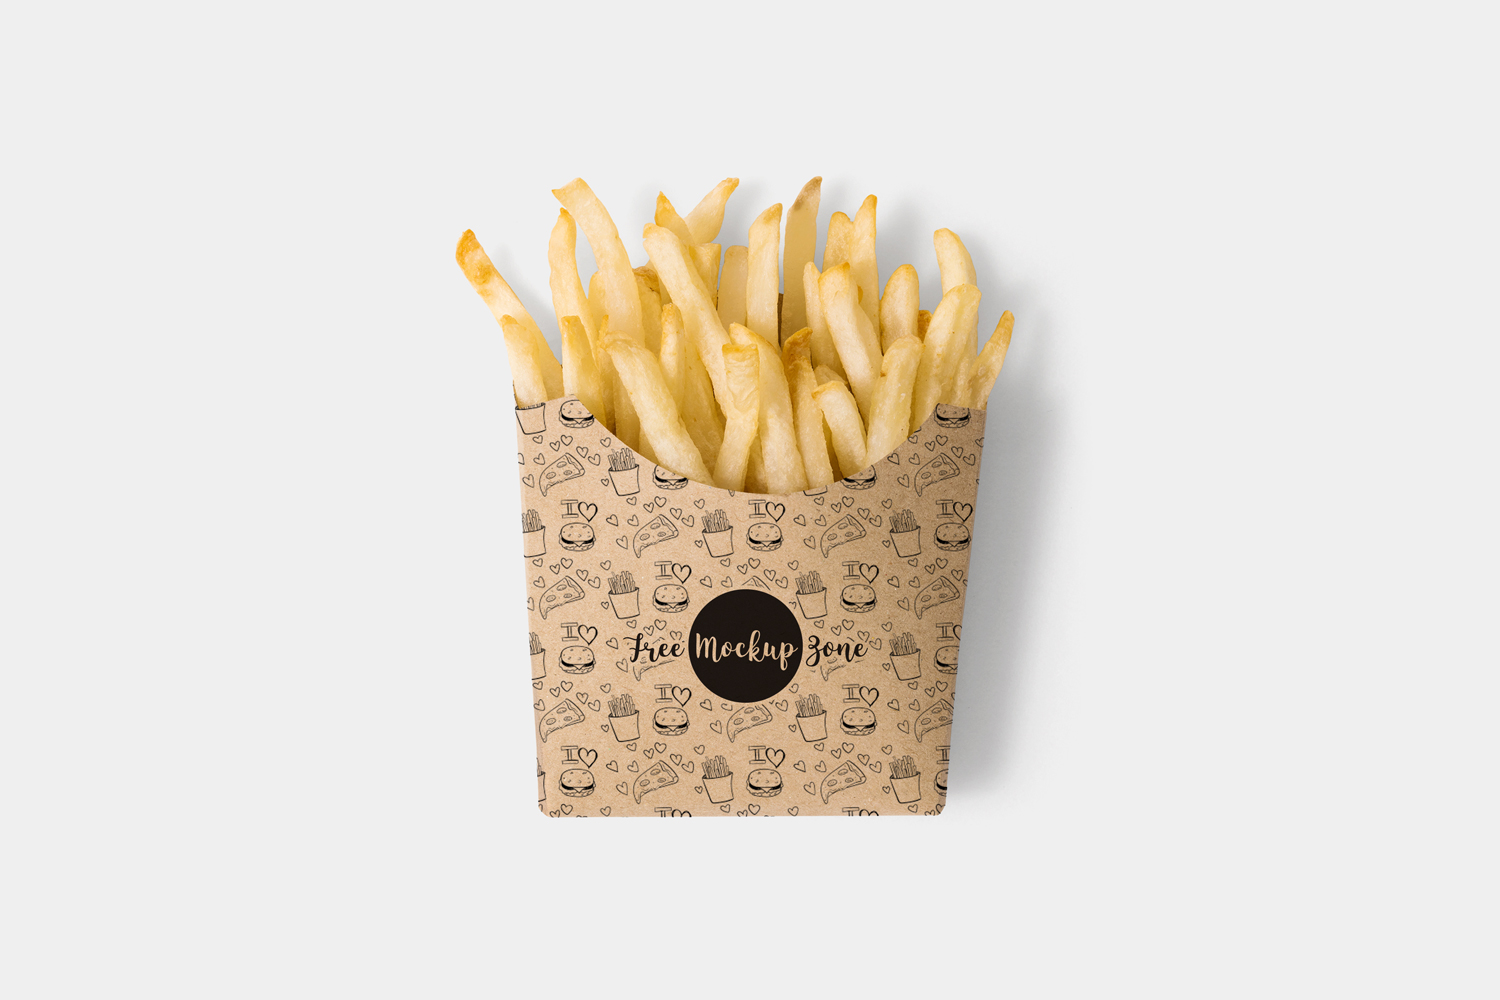 Download 5 Free French Fries Box Mockup Templates Decolore Net PSD Mockup Templates